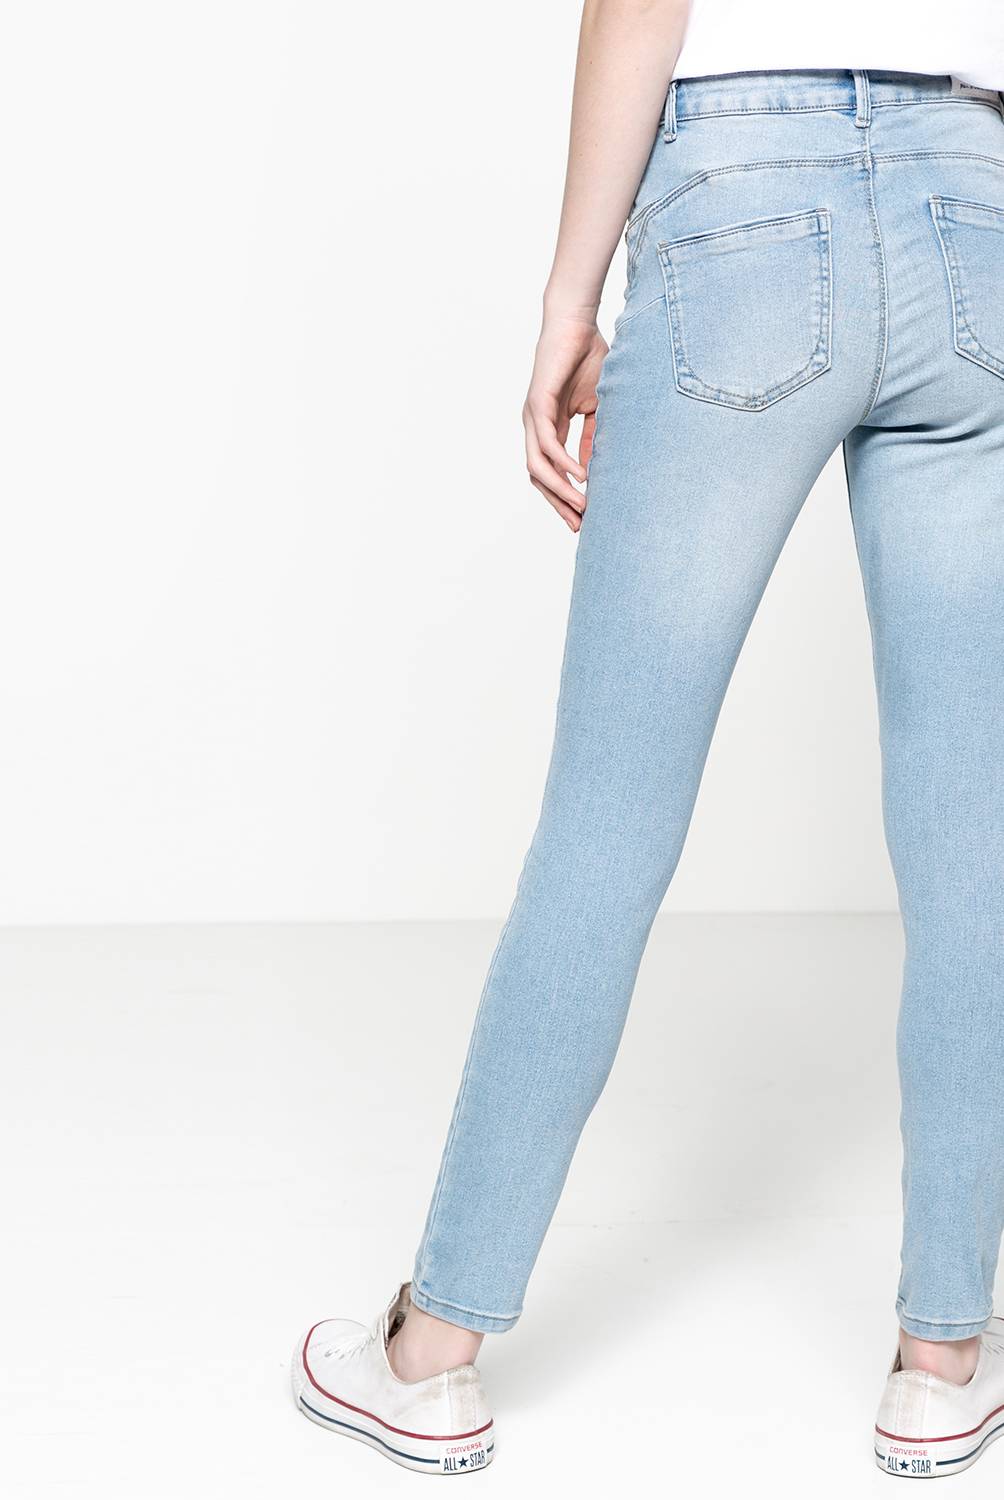 ONLY - Only Jeans Tiro Bajo Mujer